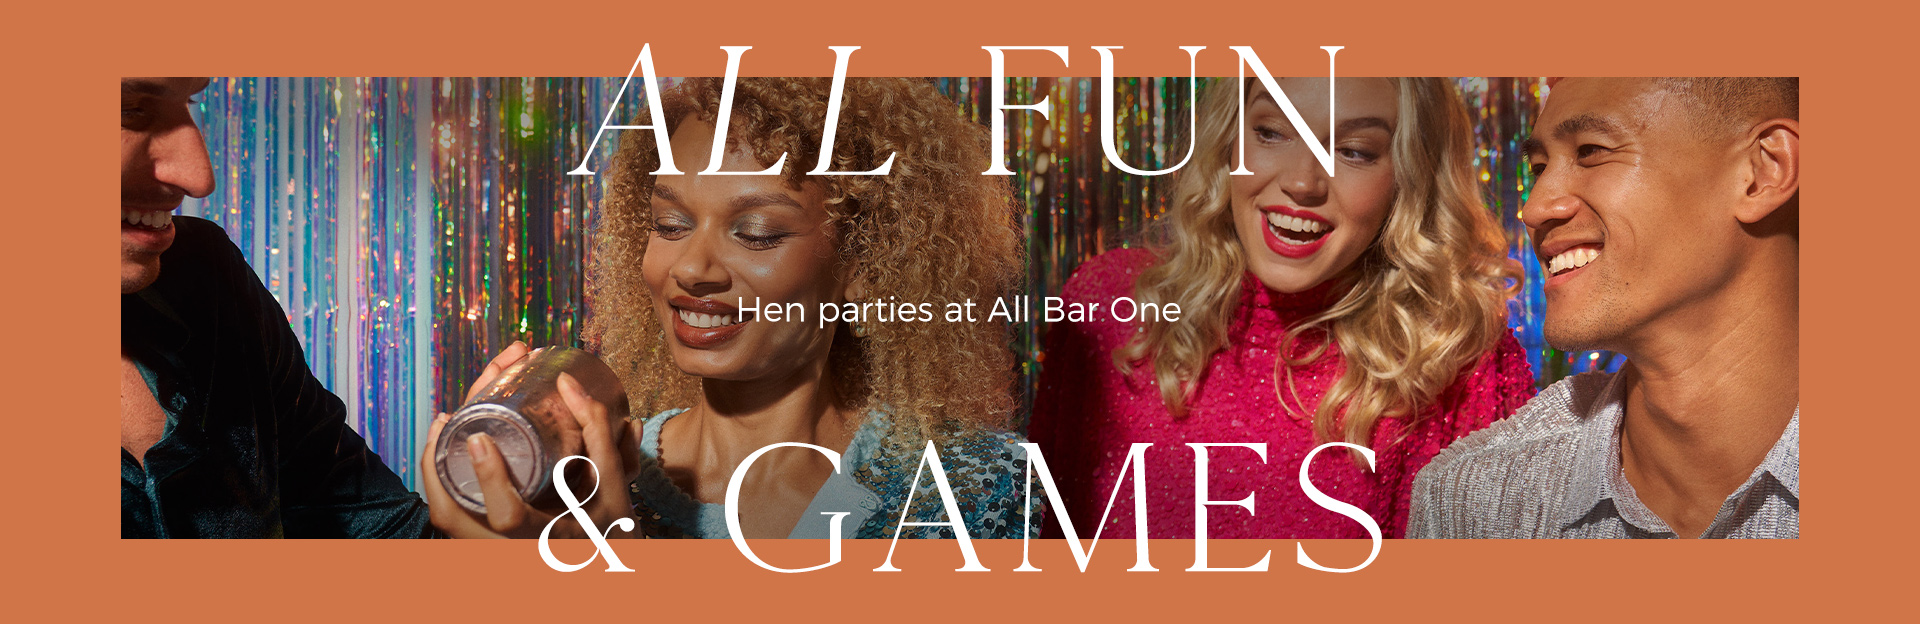 Hen parties at All Bar One Holborn